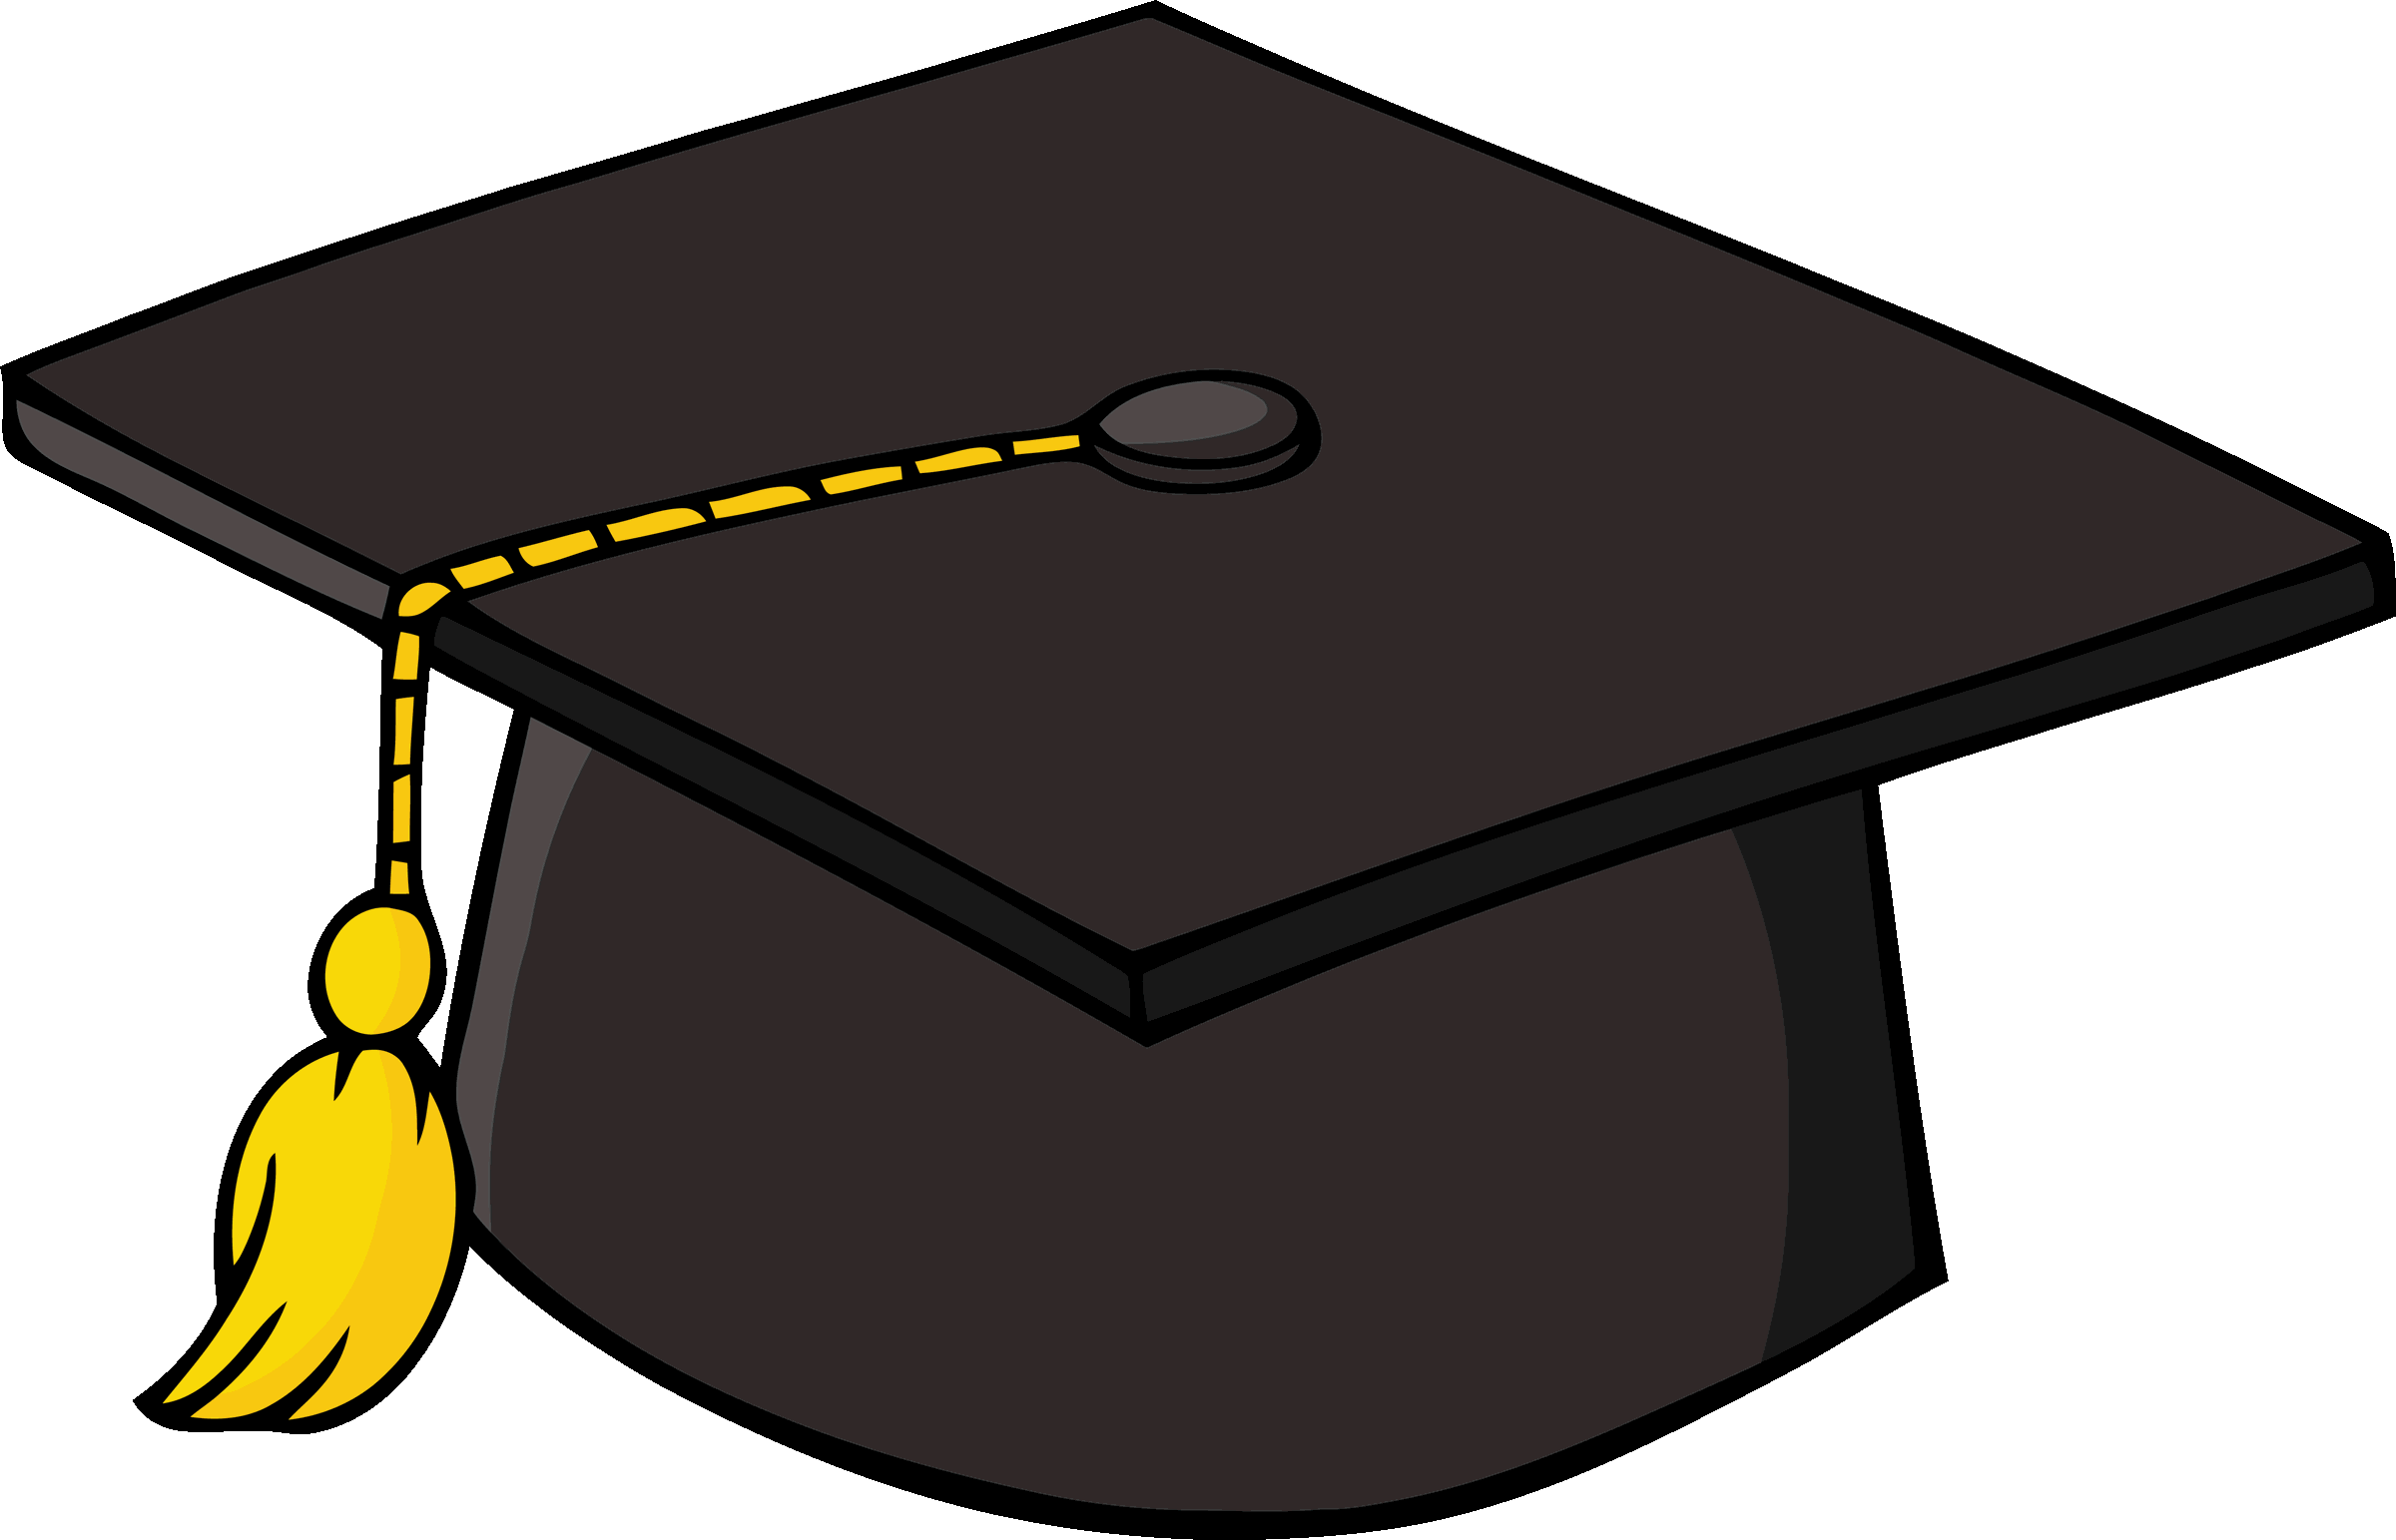 14 Graduation Caps Clip Art Free Cliparts That You Can Download To You